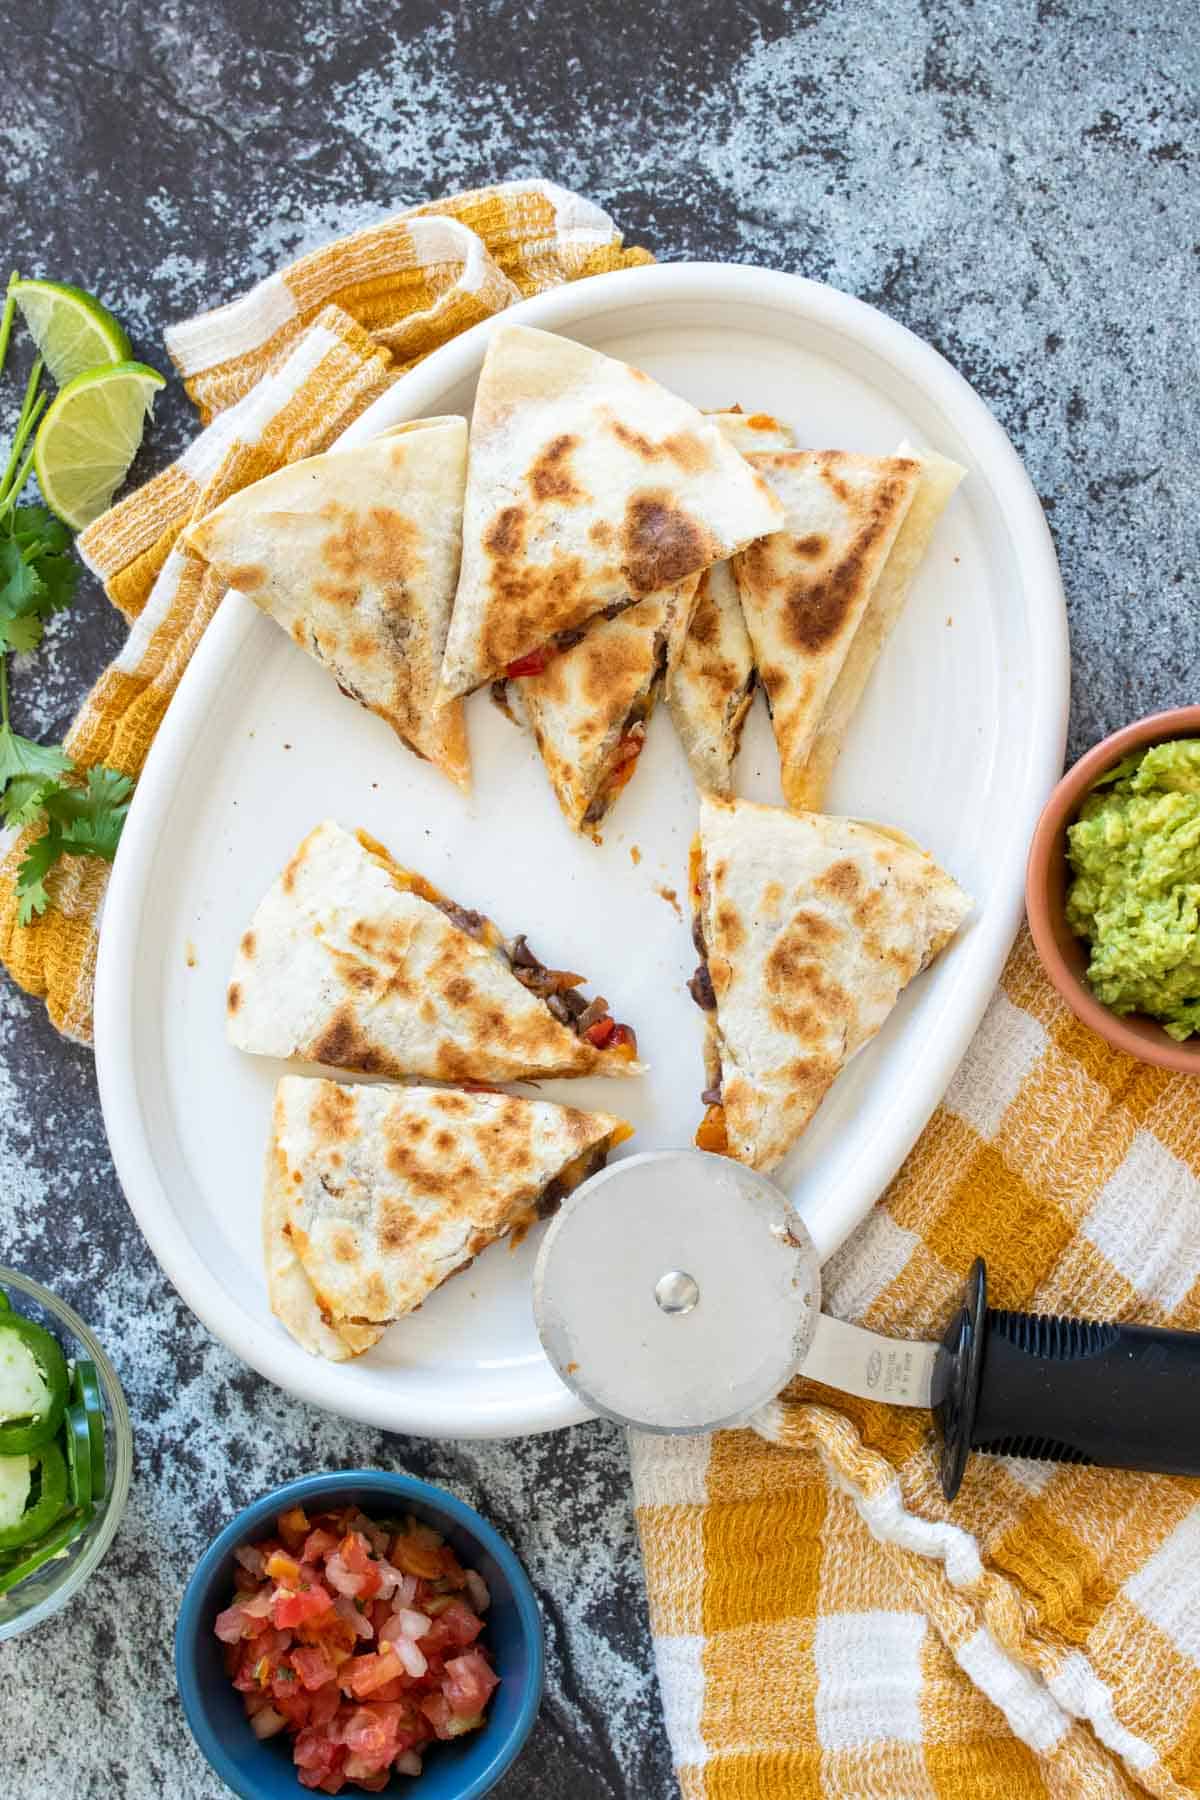 A pizza cutter next to triangles of cut quesadillas on a white plate sitting on a yellow checkered towel